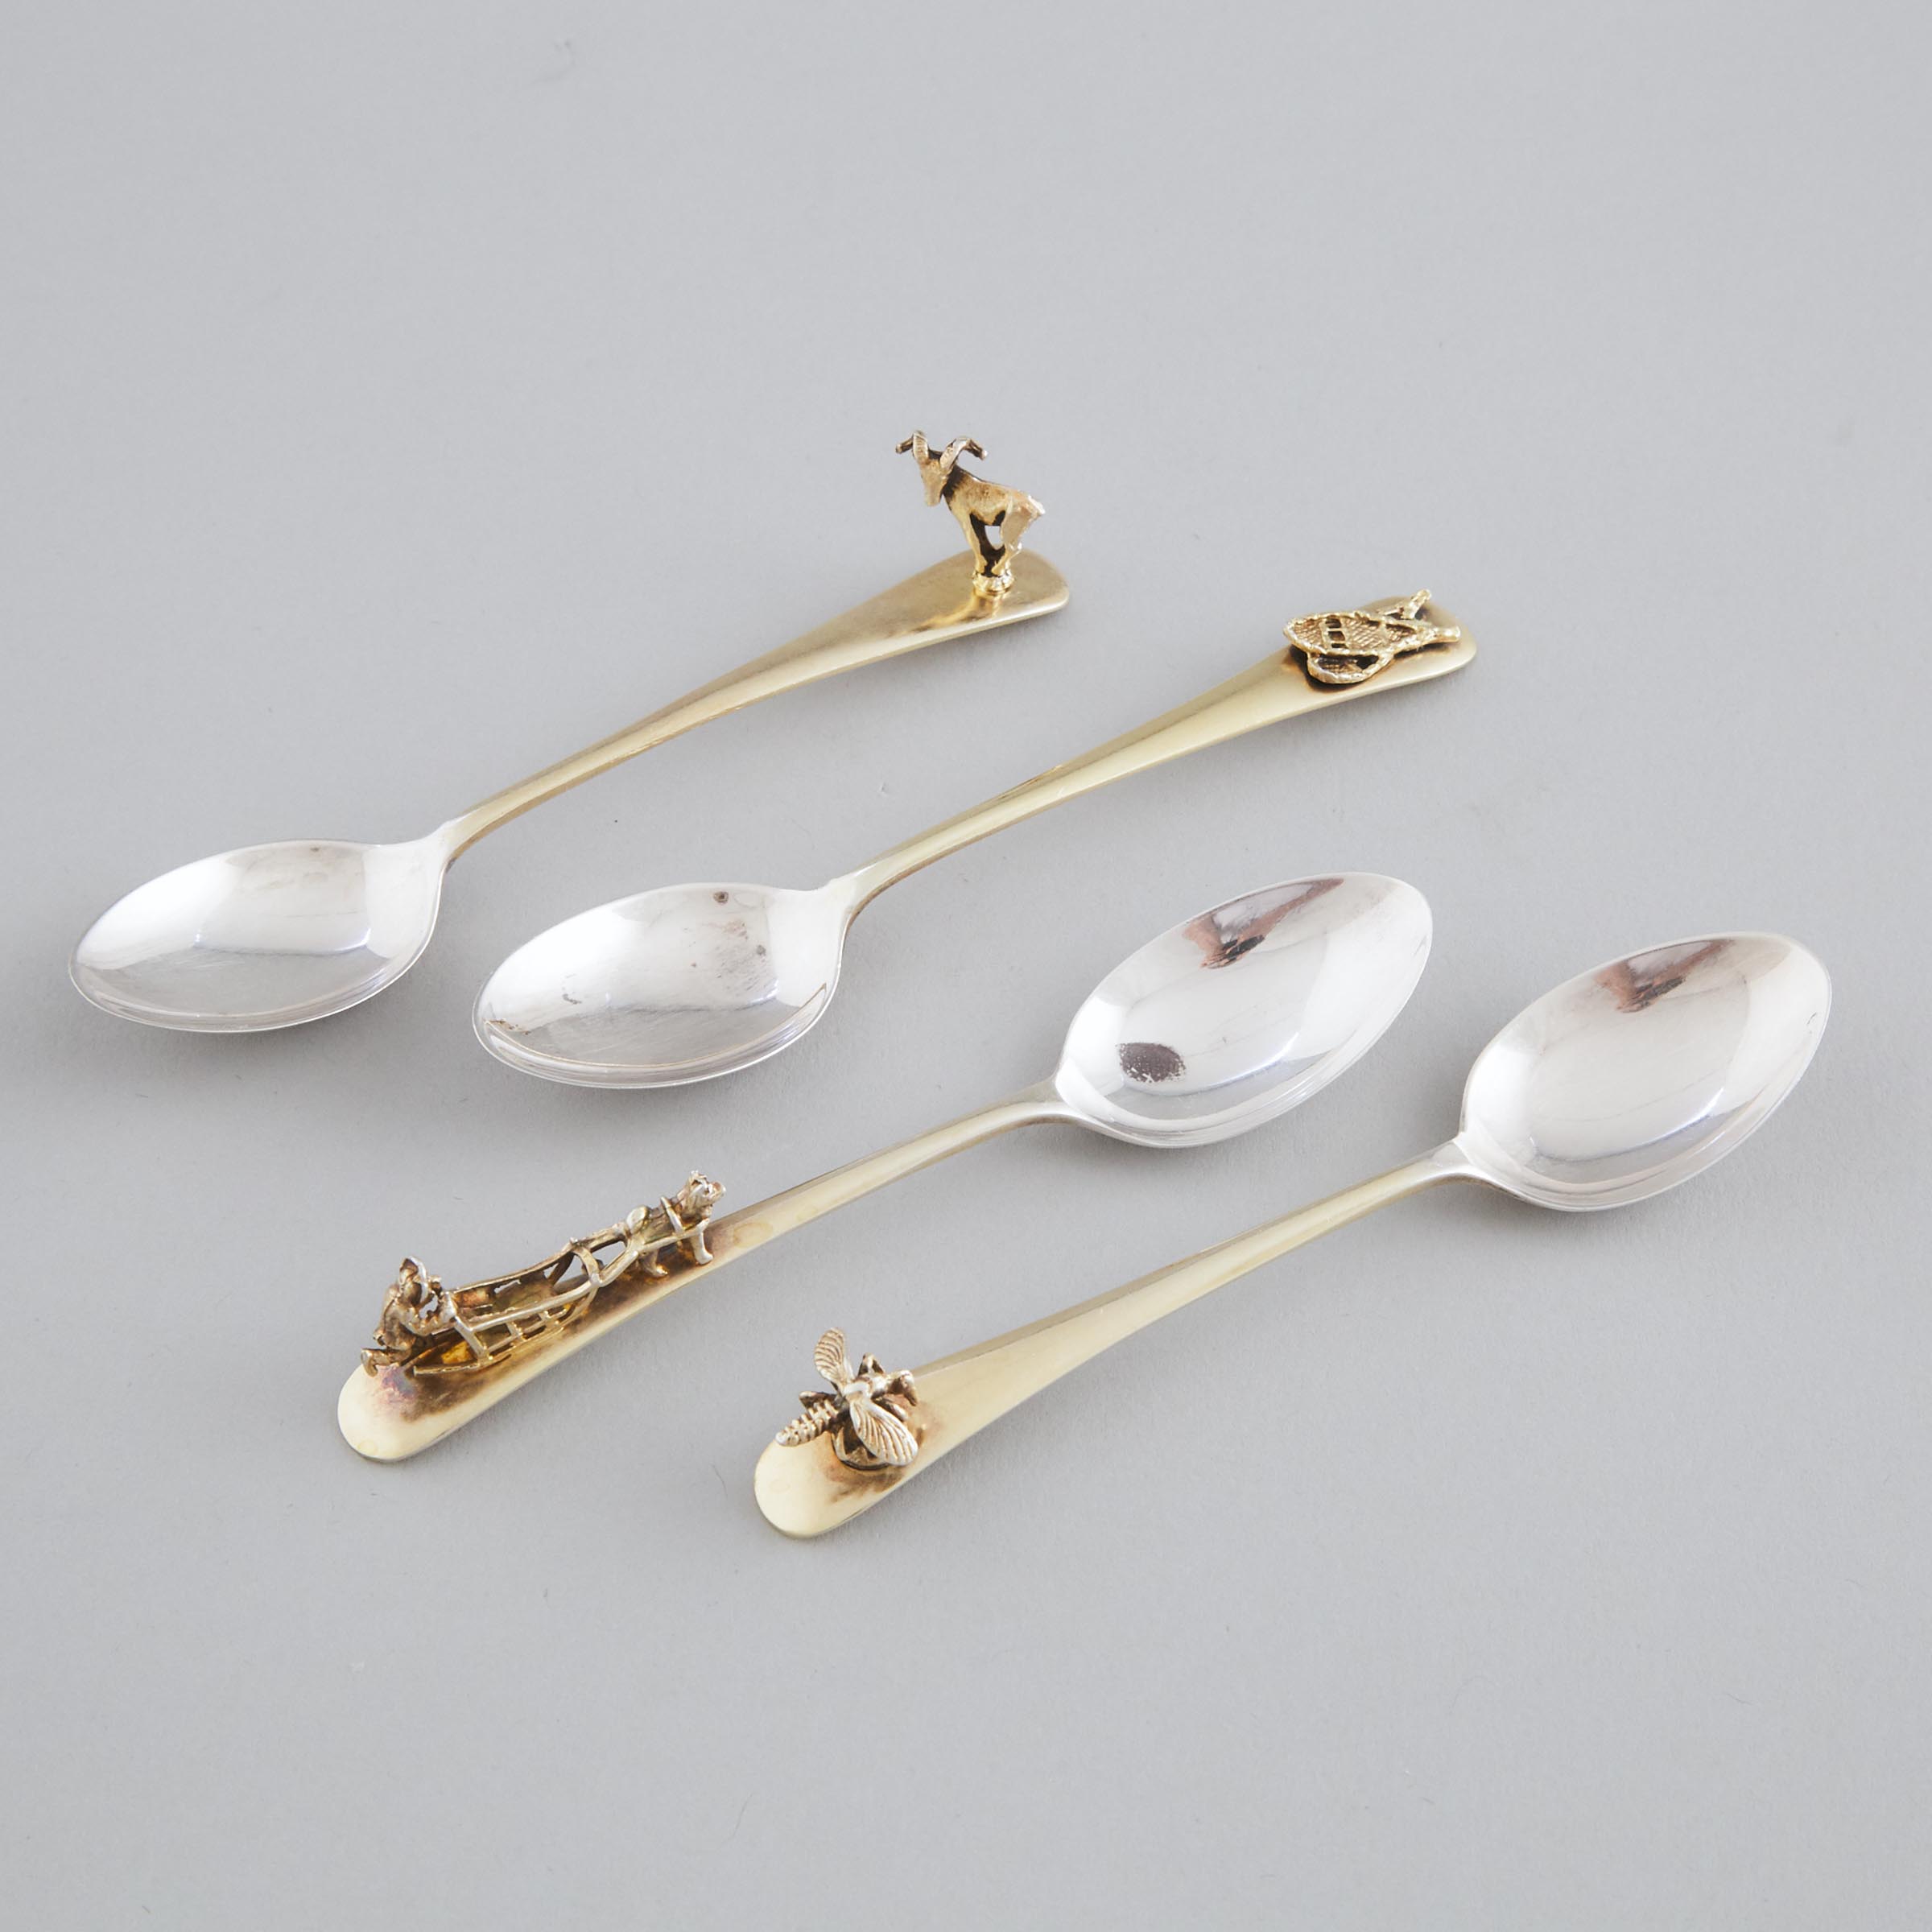 Four English Silver Parcel-Gilt Canadian-Interest Novelty Coffee Spoons, Cooper Bros. & Sons, Sheffield, 1971-73